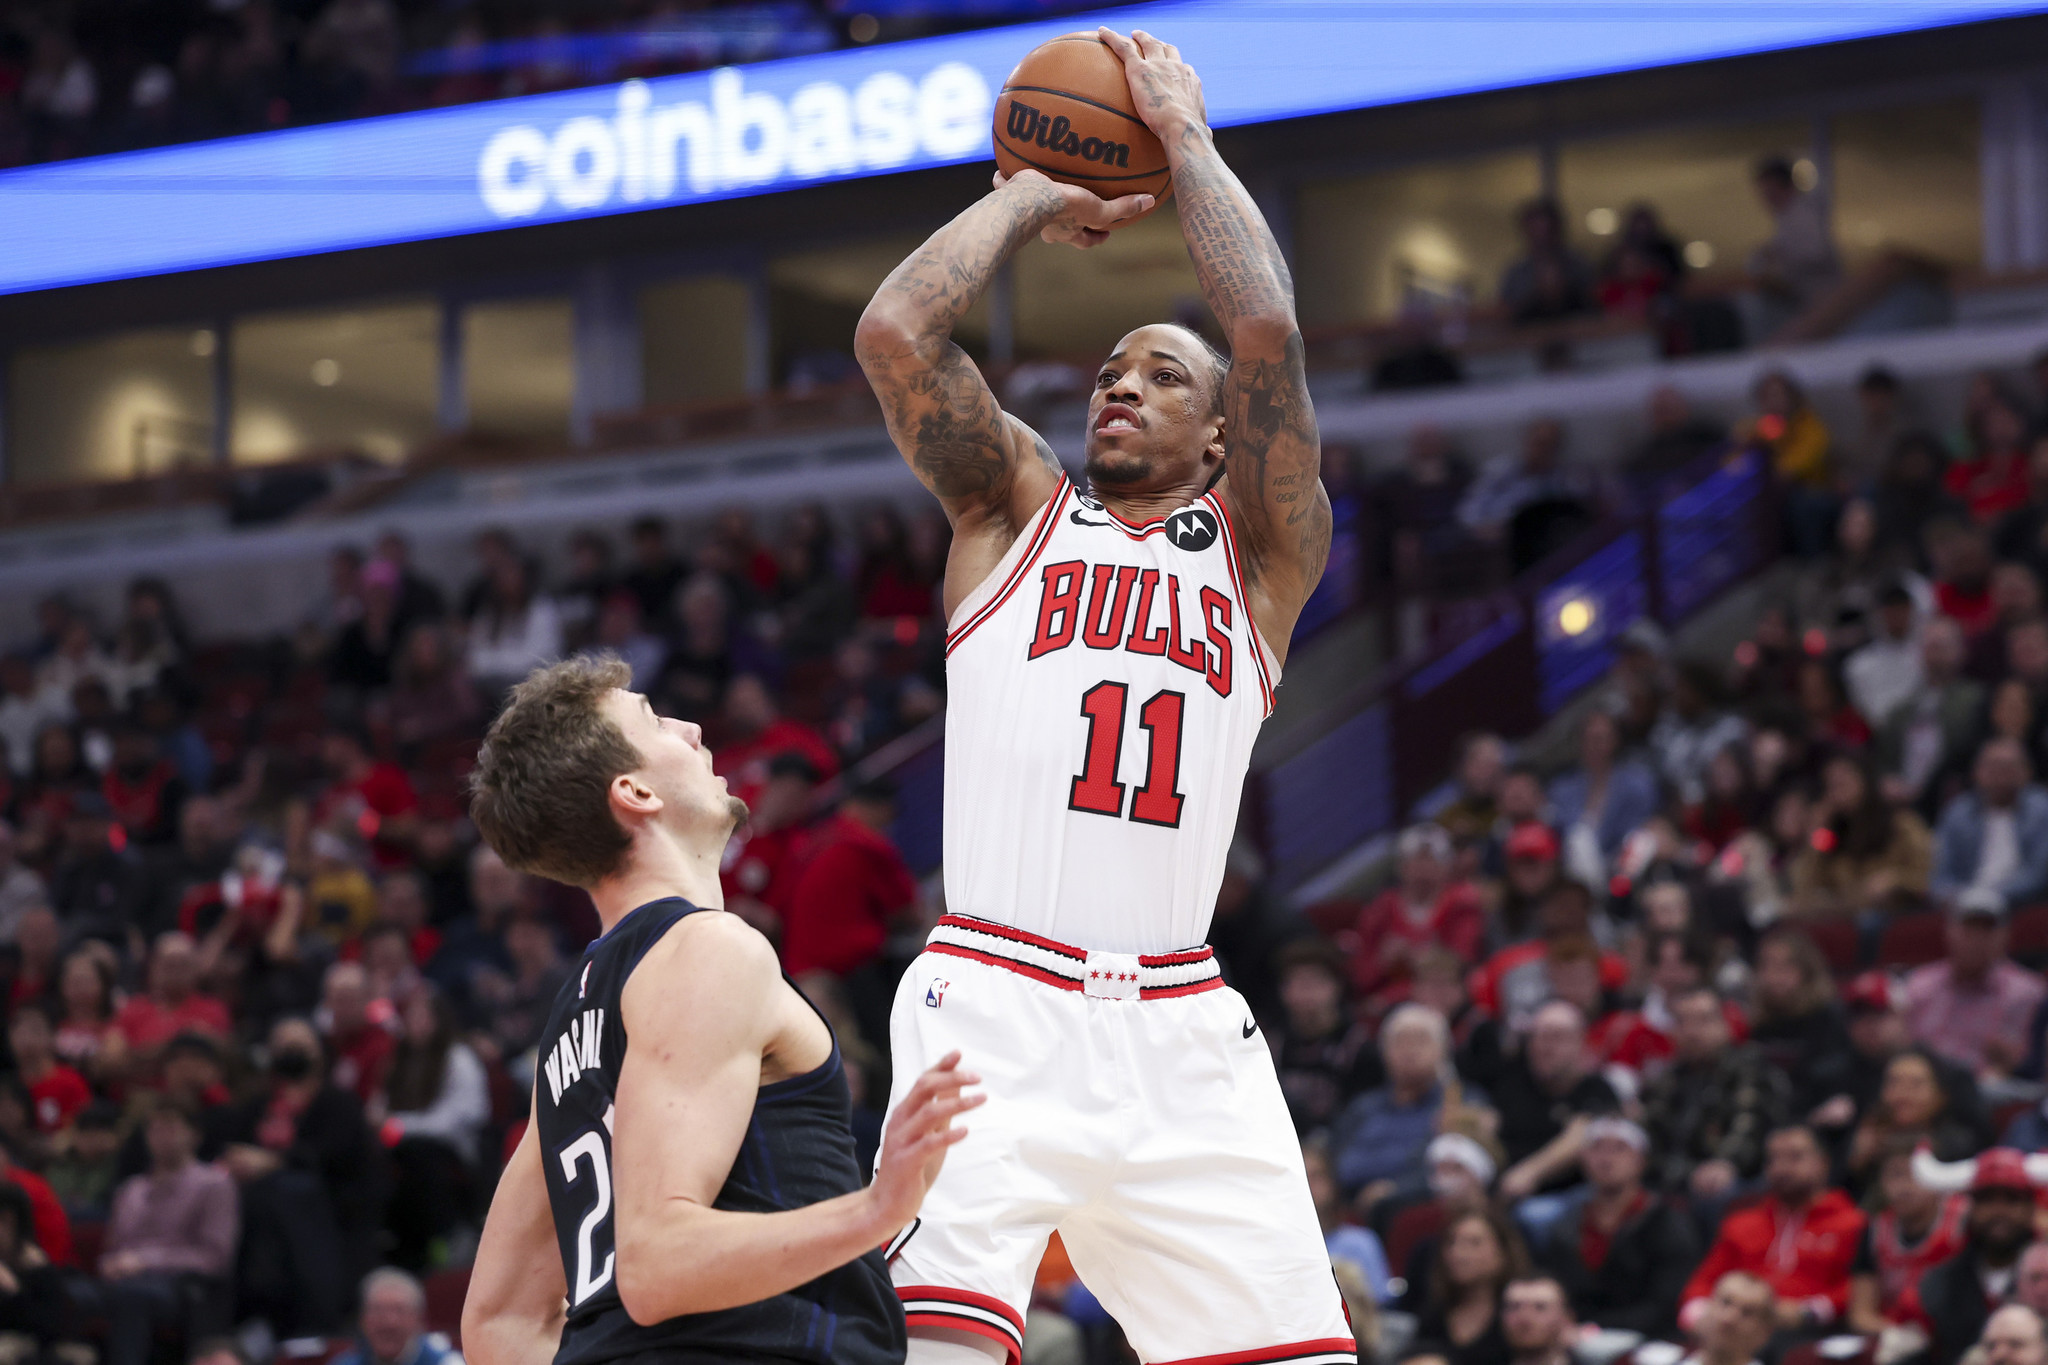 DeRozan collected motivation along his journey to becoming all-star with  Bulls